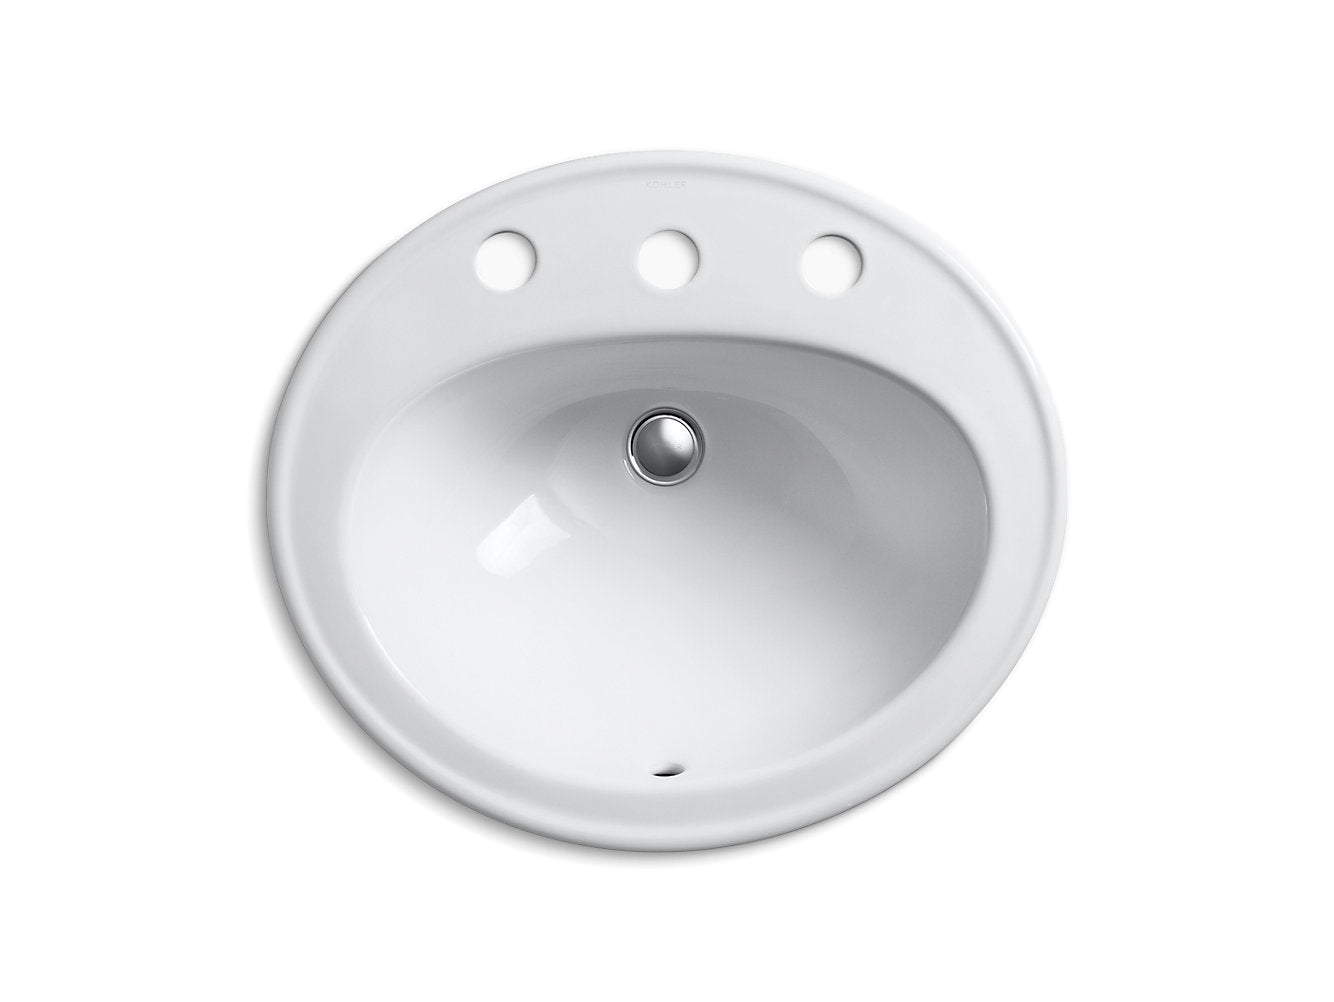 Kohler Pennington 20-1/4" X 17-1/2" Drop-In Bathroom Sink With 8" Widespread Faucet Holes- White